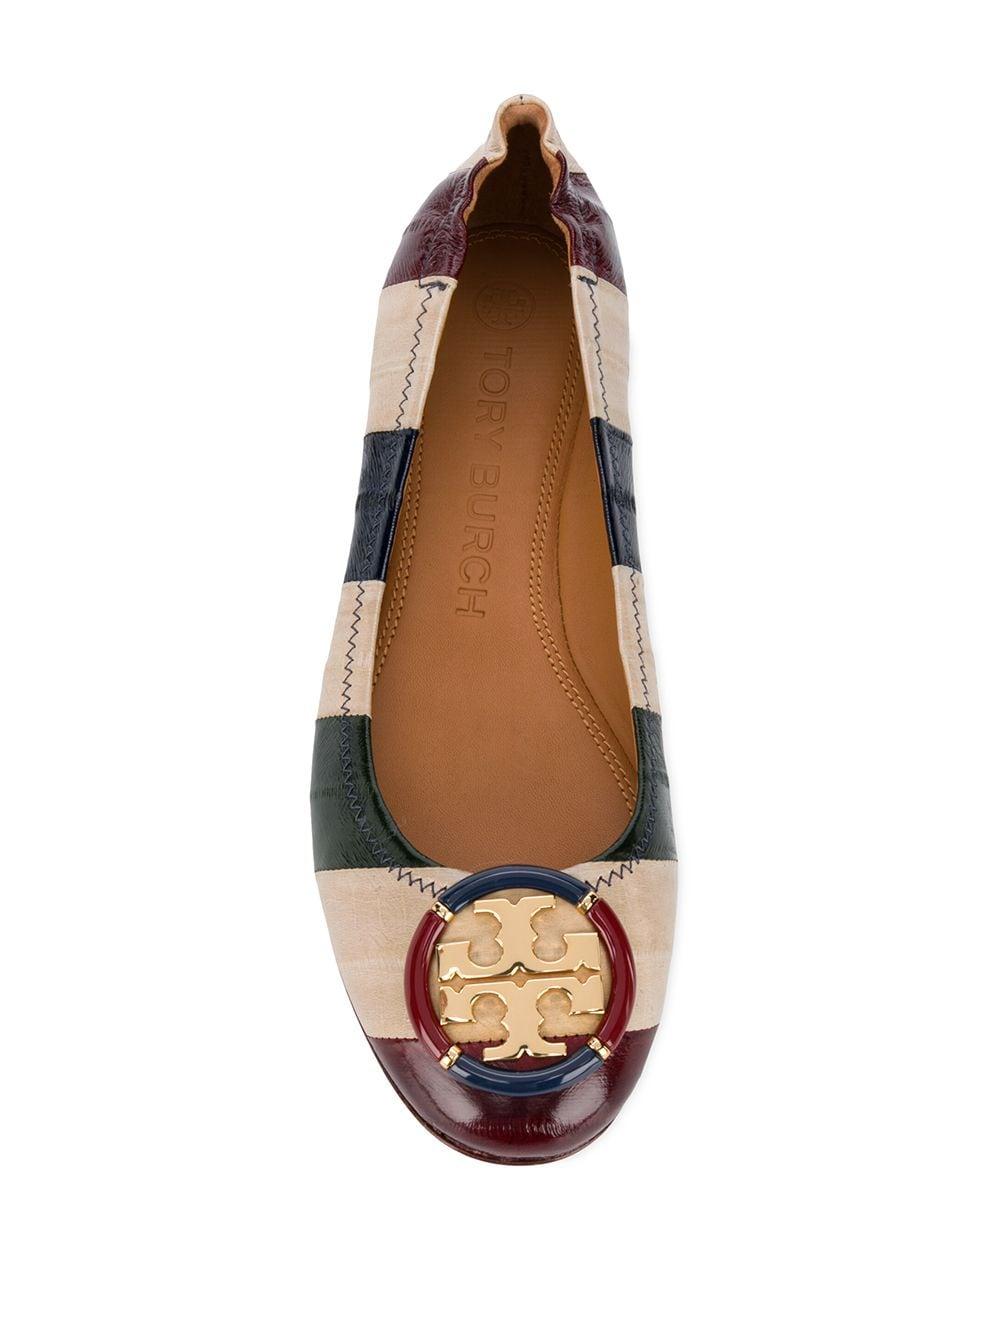 Tory Burch Striped Leather Ballerina Shoes | Lyst